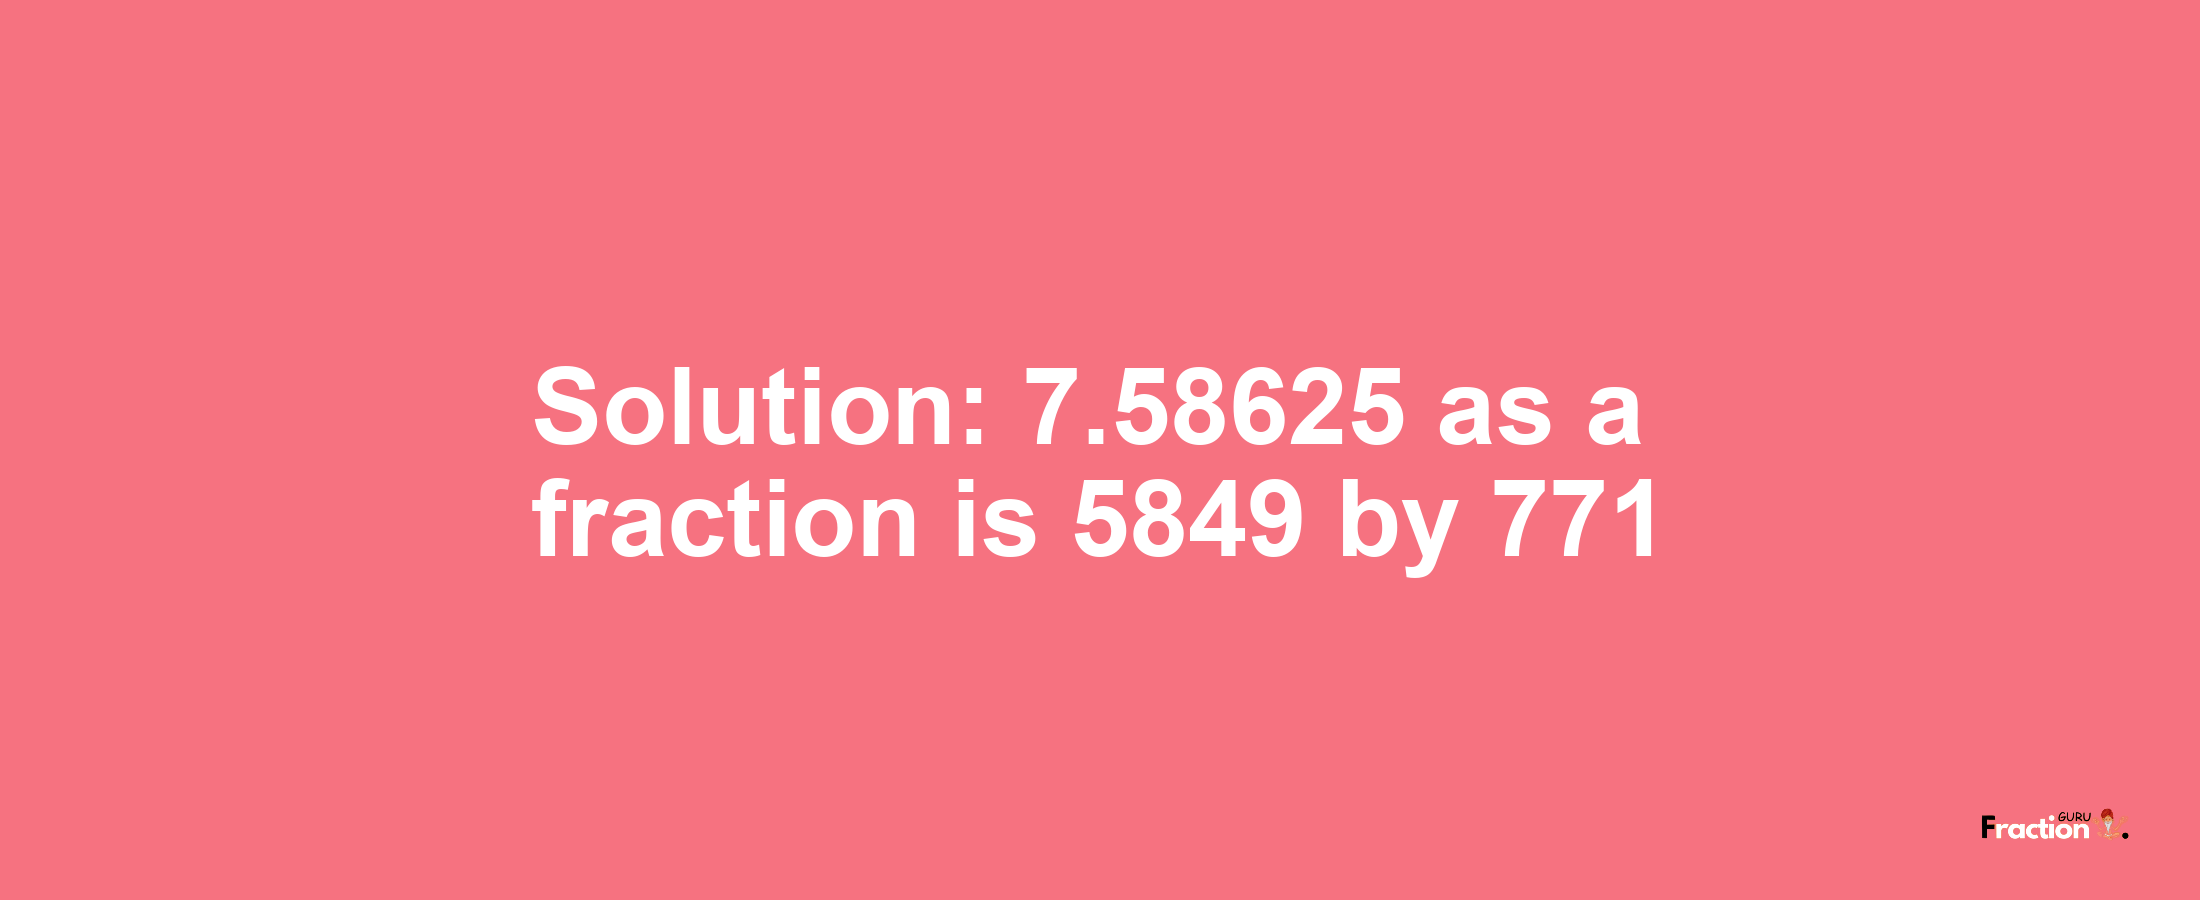 Solution:7.58625 as a fraction is 5849/771